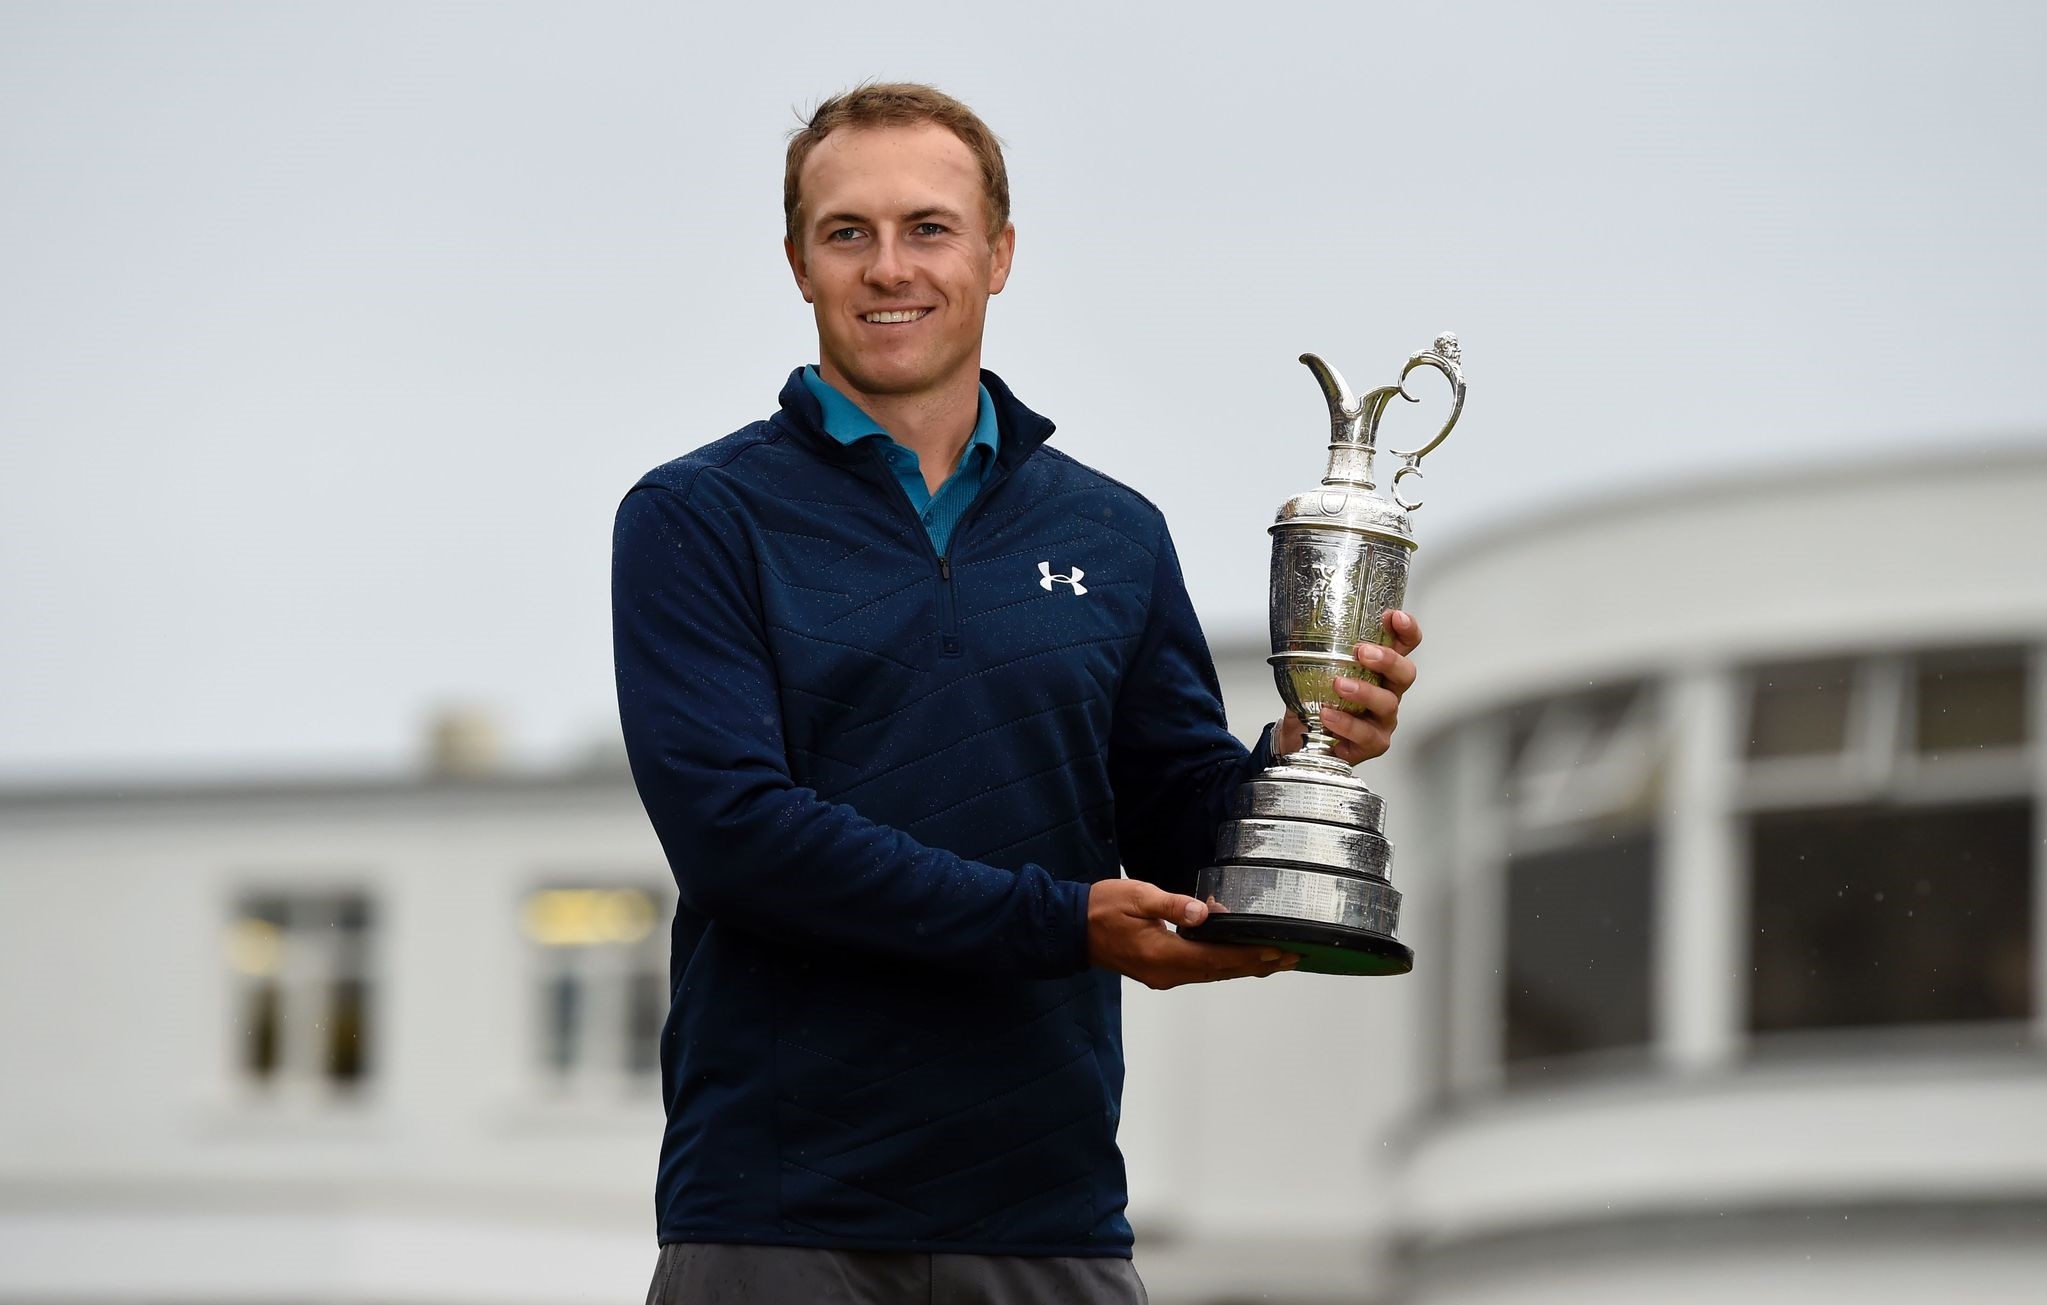 Spieth poses for pictures with the Claret Jug, the trophy for the Champion golfer of the year after winning the 2017 British Open Golf Championship. (AFP Photo)